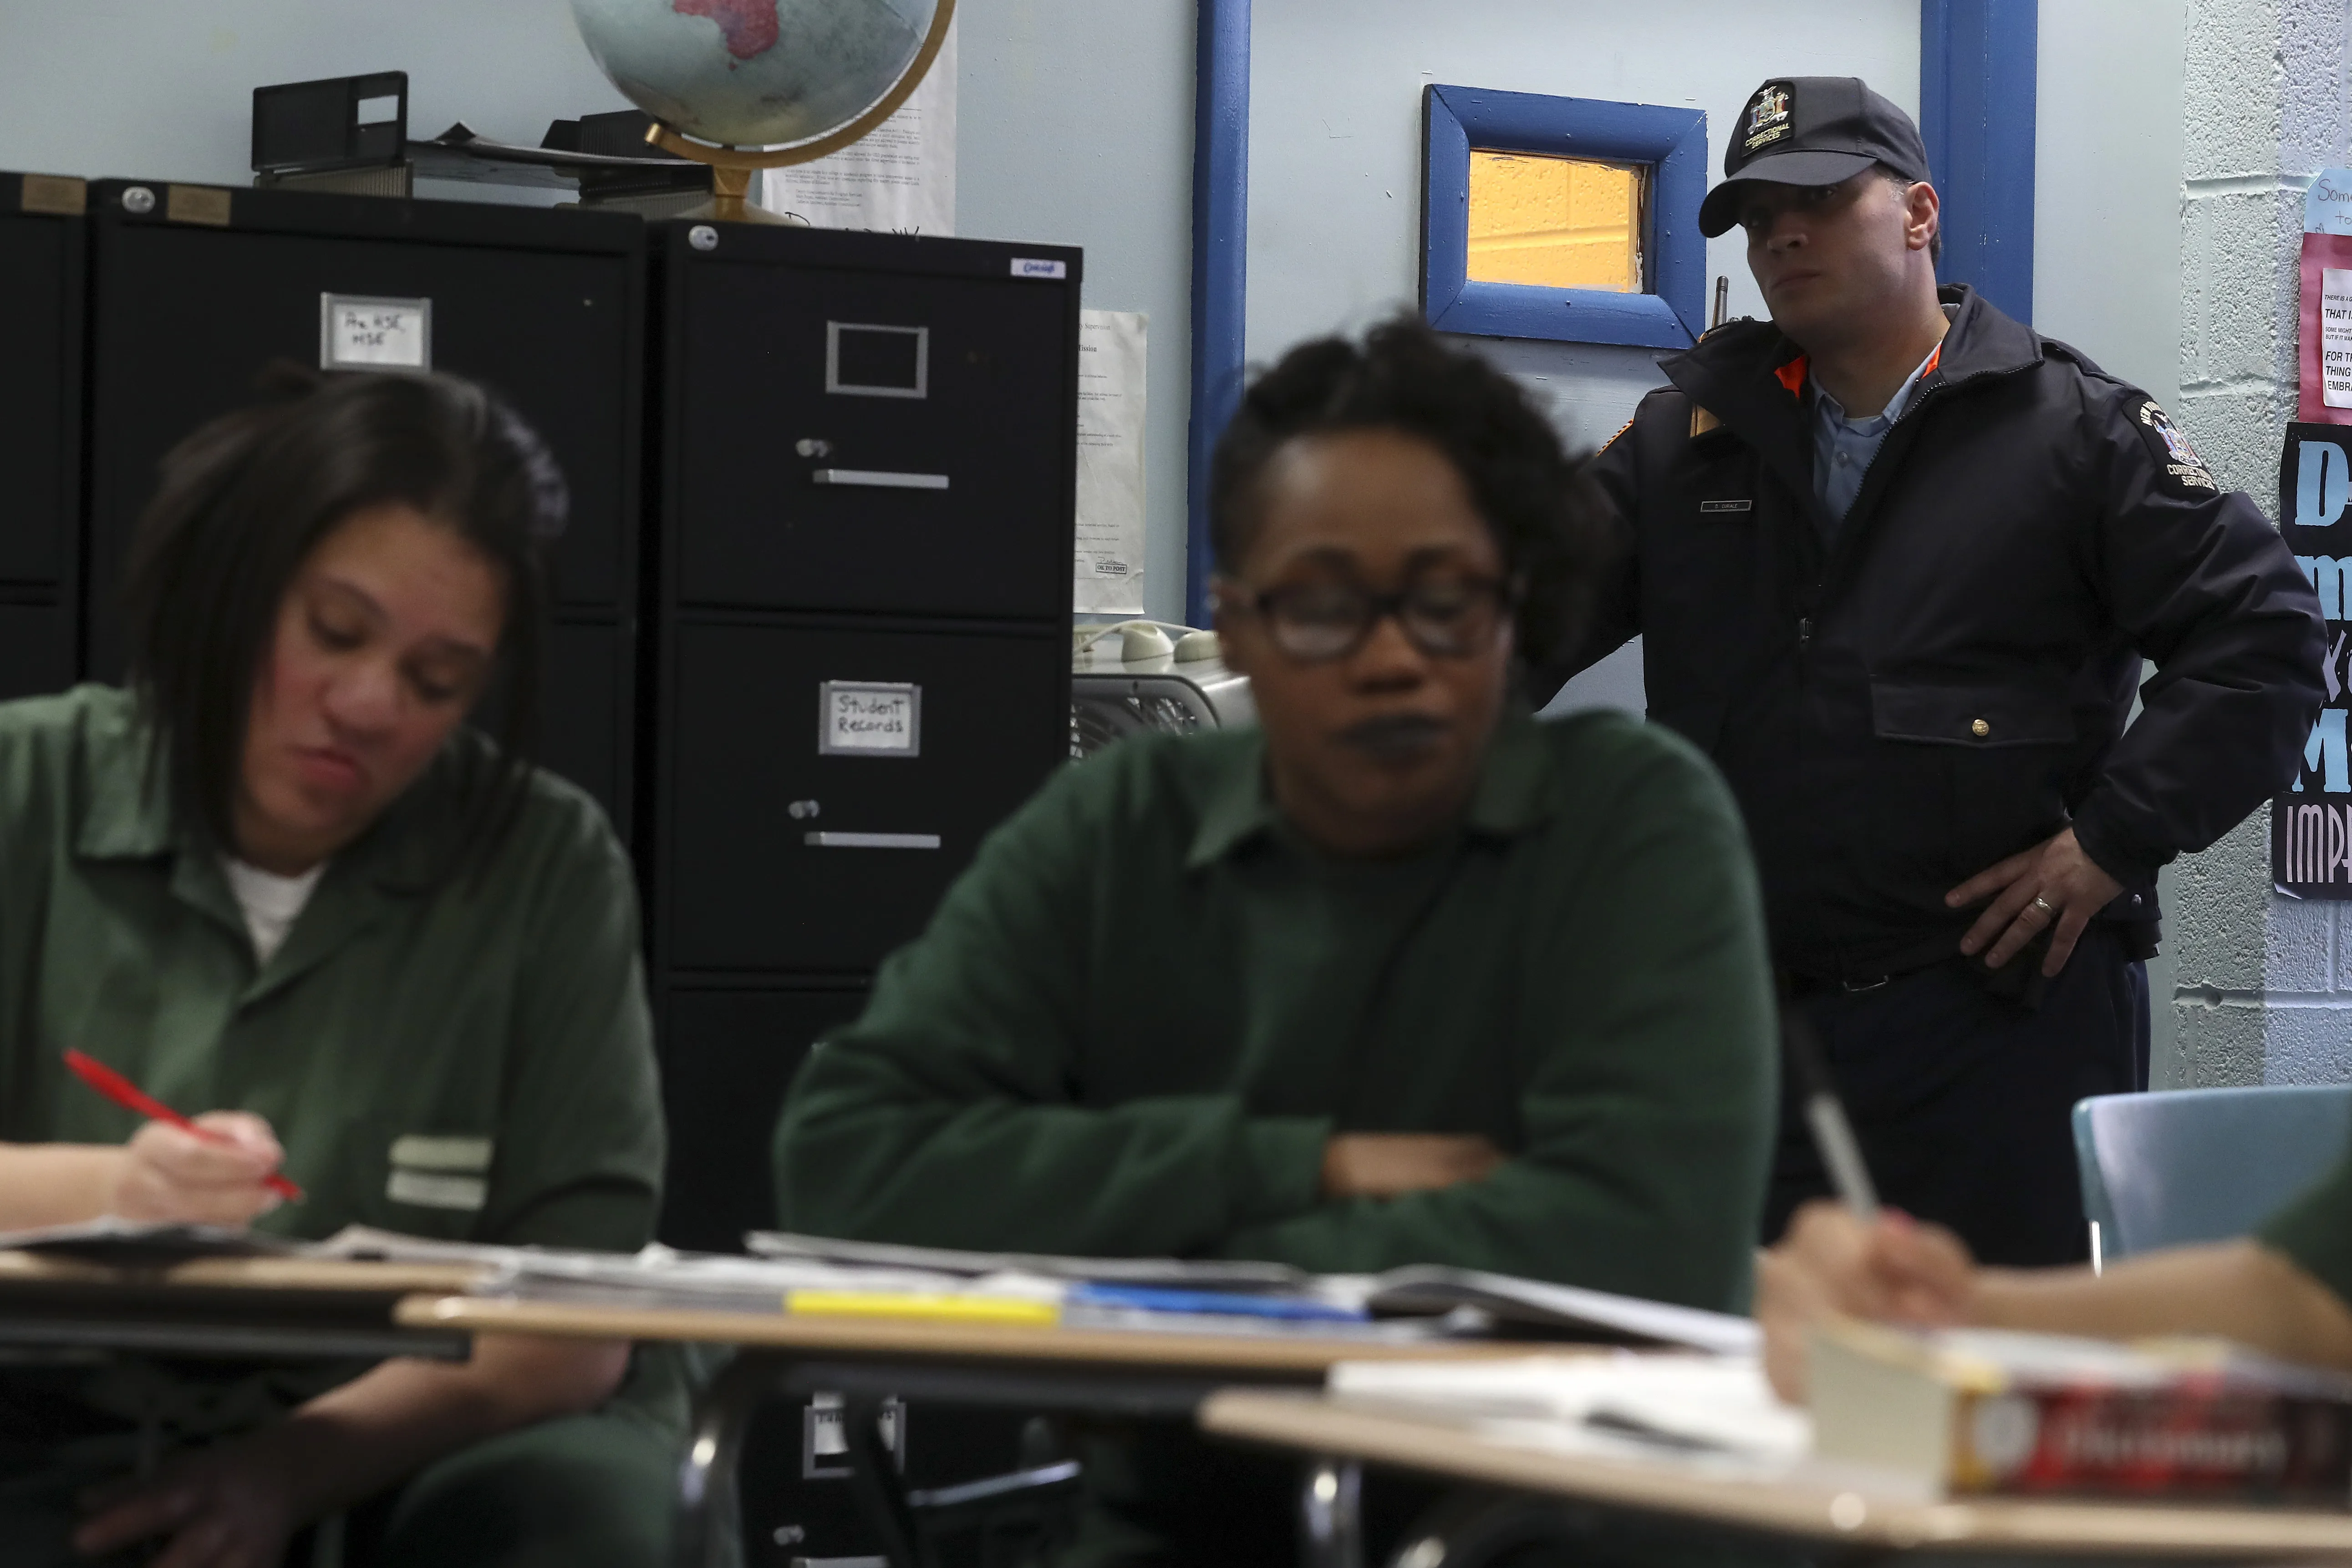 A prison guard keeps watch during class at the Taconic Correctional Facility in Bedford Hills, New York April 8, 2016. Inmates at Taconic Correctional Facility, a medium security women's prison in suburban Bedford Hills near New York City, are reading the classic works of Homer, Euripides and Virgil. The Columbia University course, organised by the non-profit Hudson Link for Higher Education in Prison, aims to boost employment for convicts after release and reduce rates of reoffending. REUTERS/Carlo Allegri SEARCH "TACONIC ALLEGRI" FOR THIS STORY. SEARCH "THE WIDER IMAGE" FOR ALL STORIES   TPX IMAGES OF THE DAY